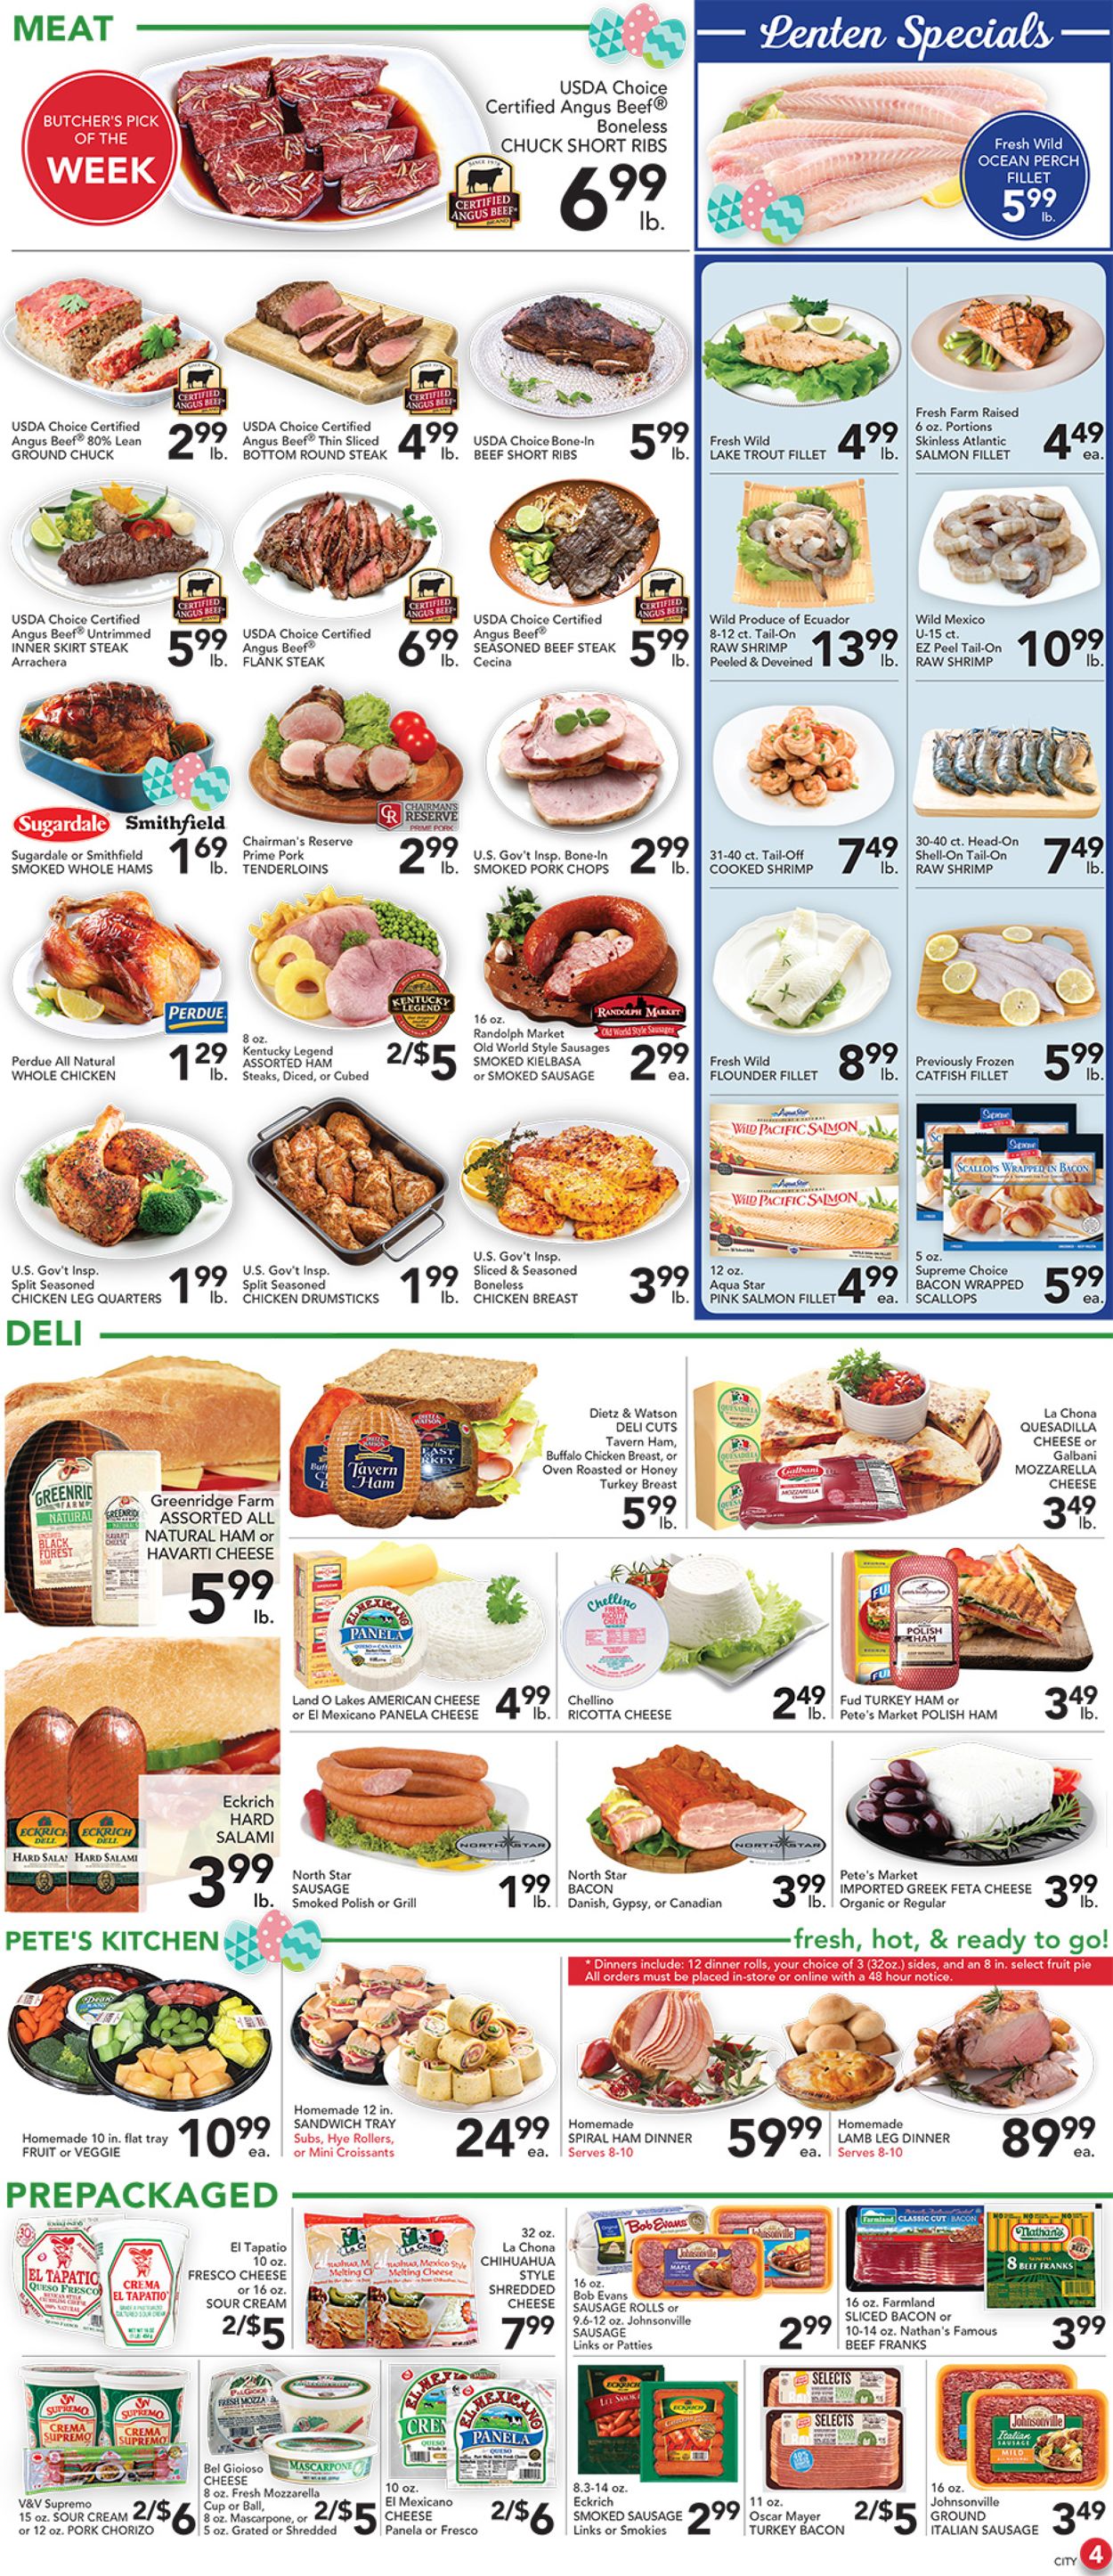 Pete's Fresh Market Easter 2021 ad Weekly Ad Circular - valid 03/31-04/06/2021 (Page 4)